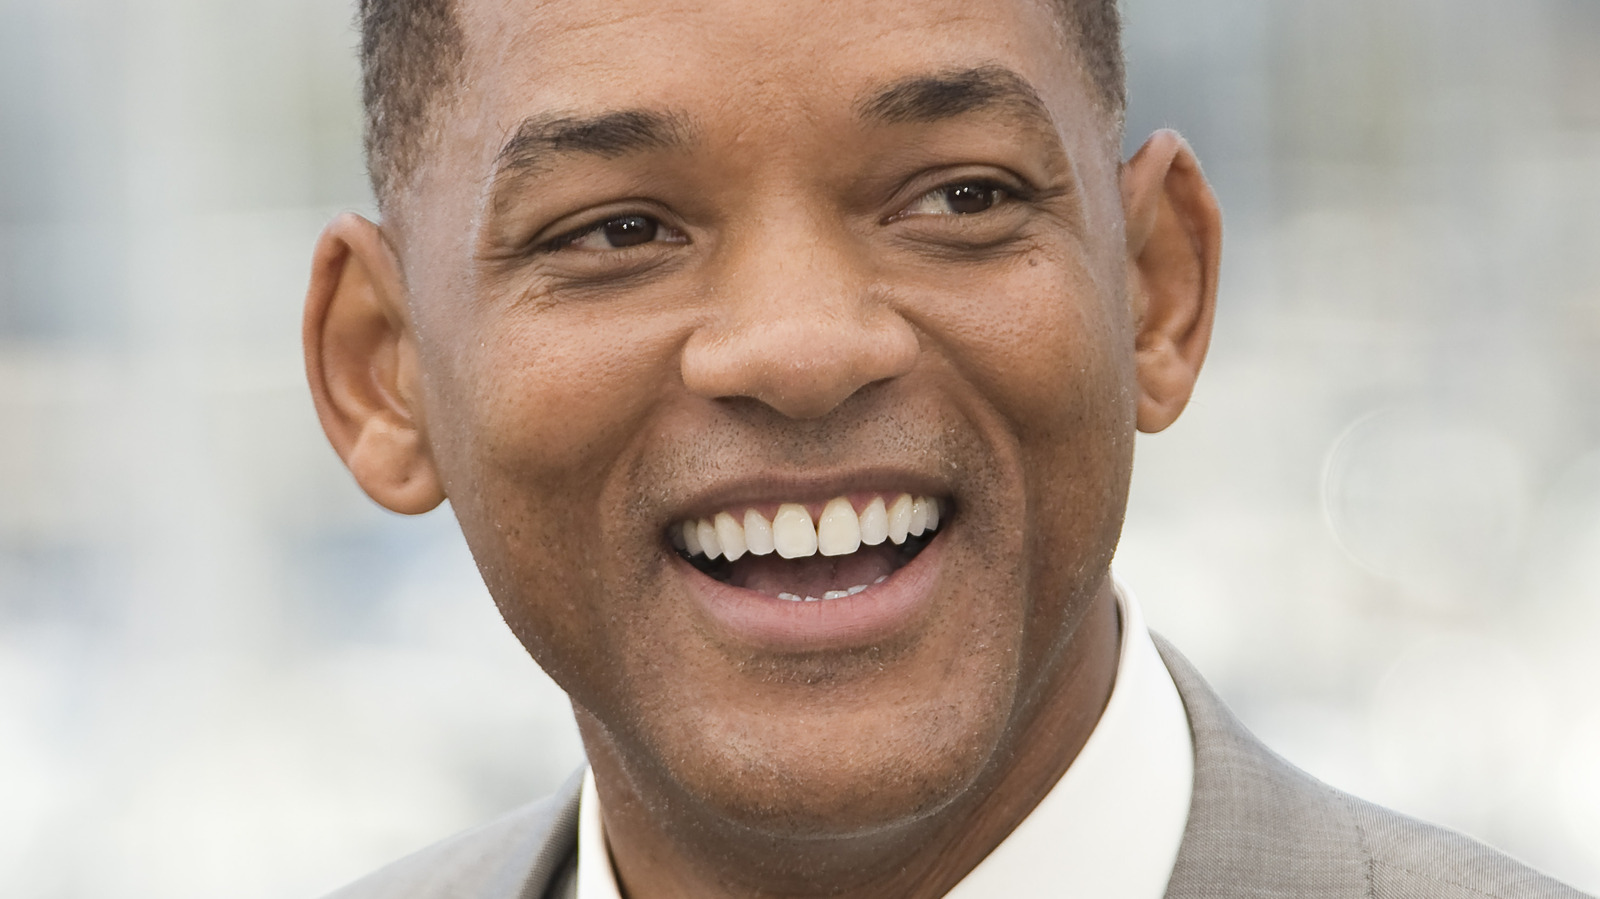 Will Smith’s Career Reportedly Suffers Yet Another Blow After Oscars Slap